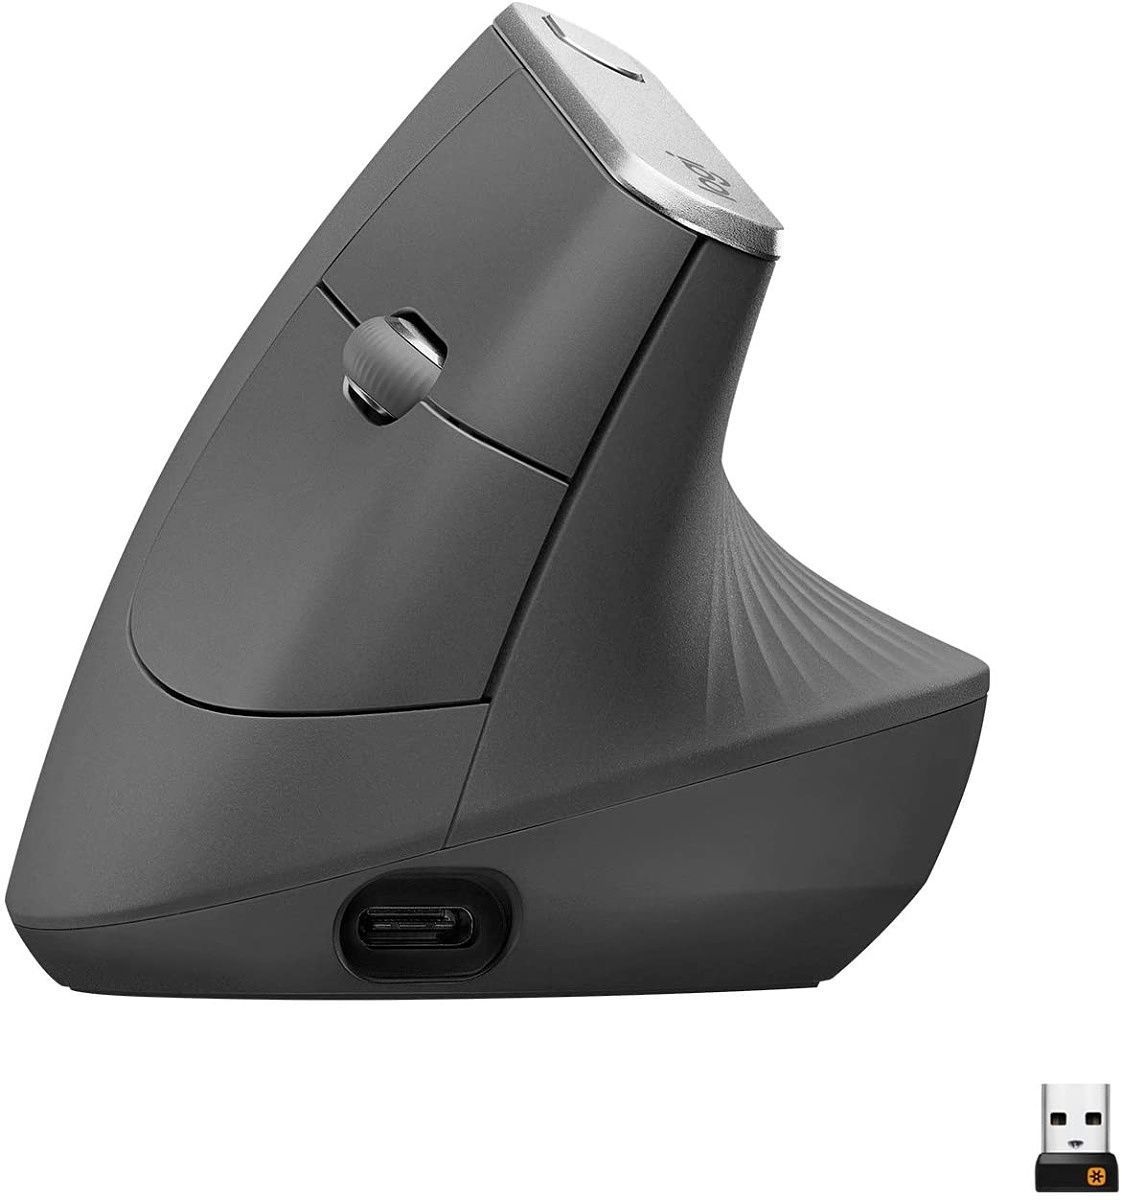 Many don't know this, but a vertical mouse is the best you can get for your posture. This Logitech option gives you the ideal design for long-term comfort and it's fully functional with both Bluetooth and wireless dongle connectivity options.